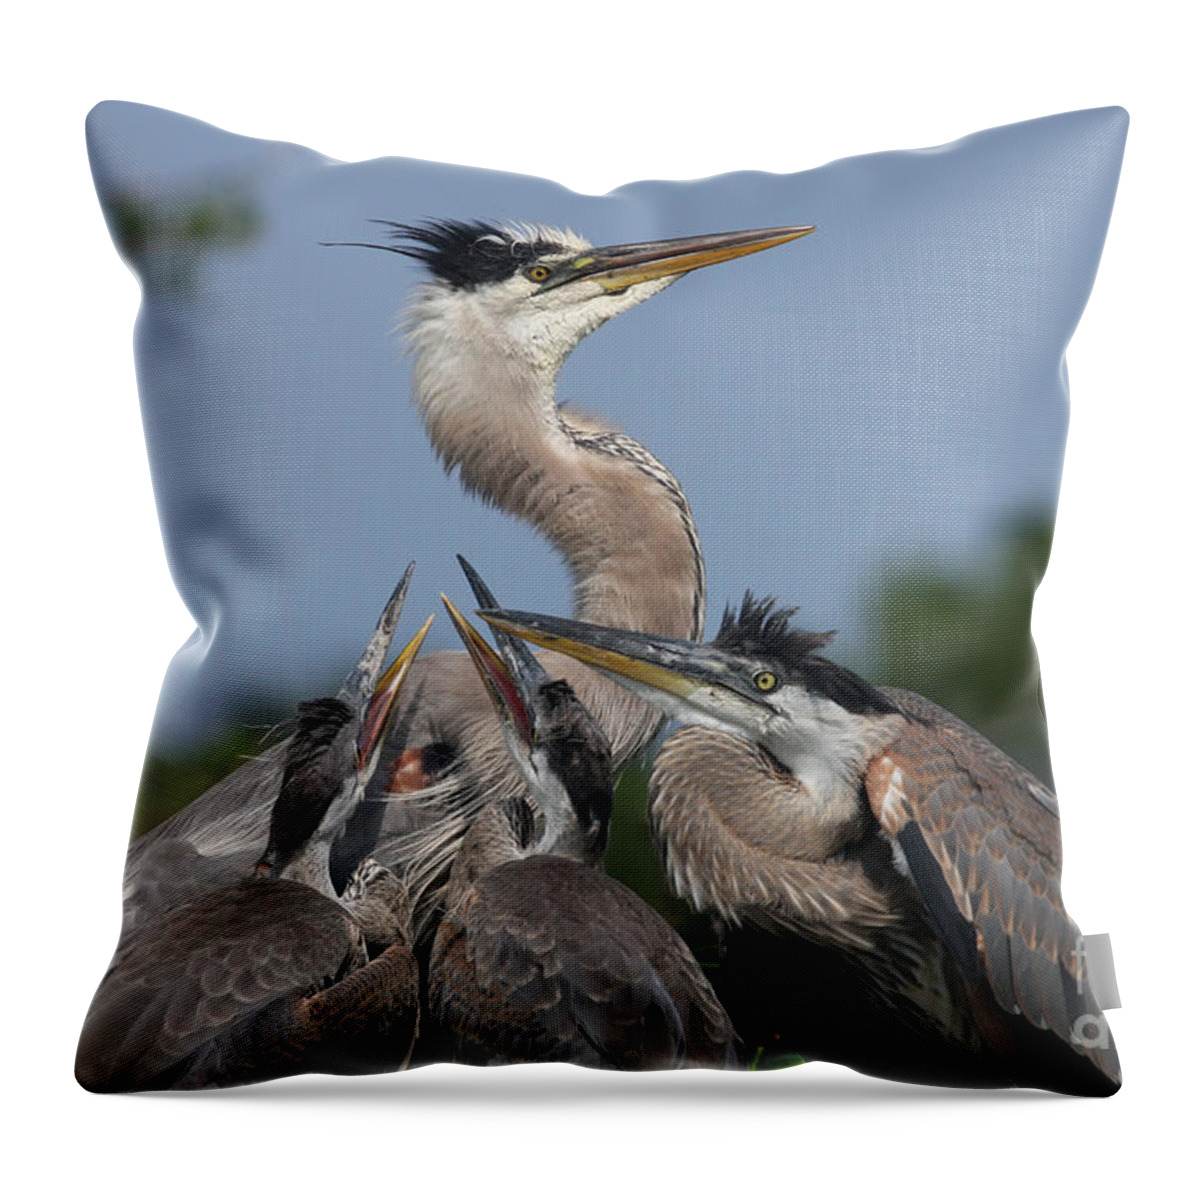 Great Throw Pillow featuring the photograph Family Portrait by Jayne Carney